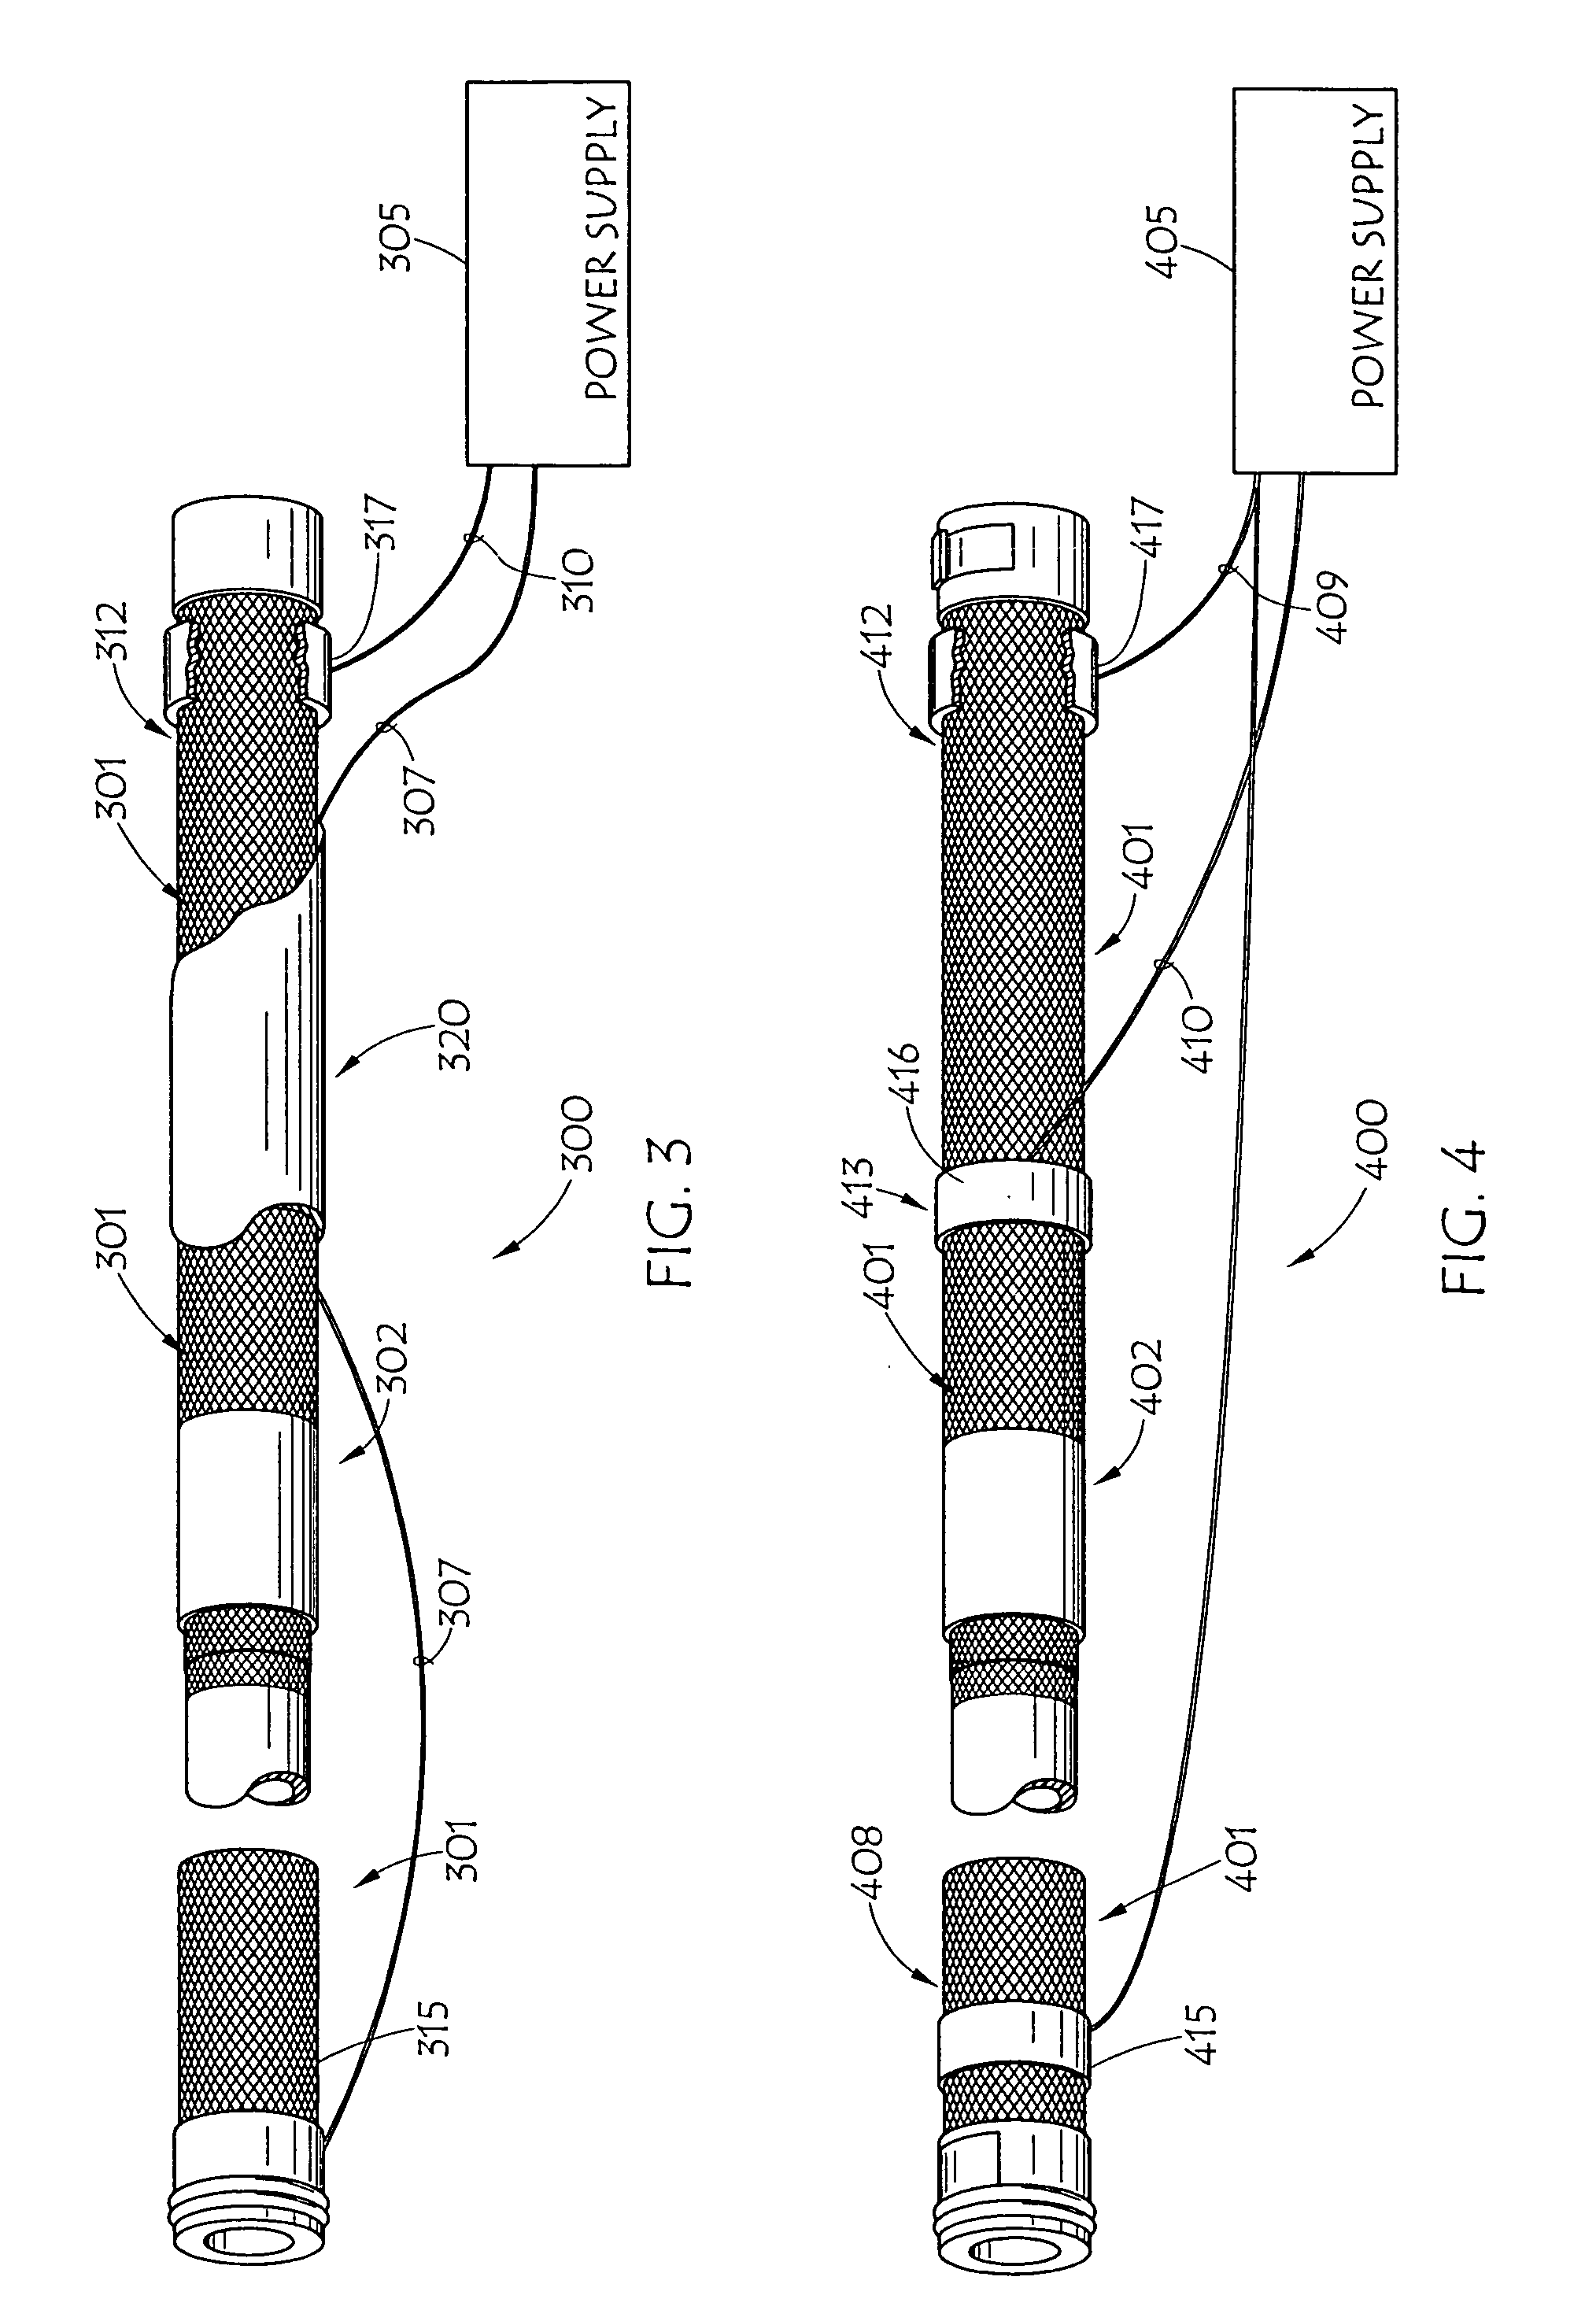 Heated fluid conduits, systems and methods